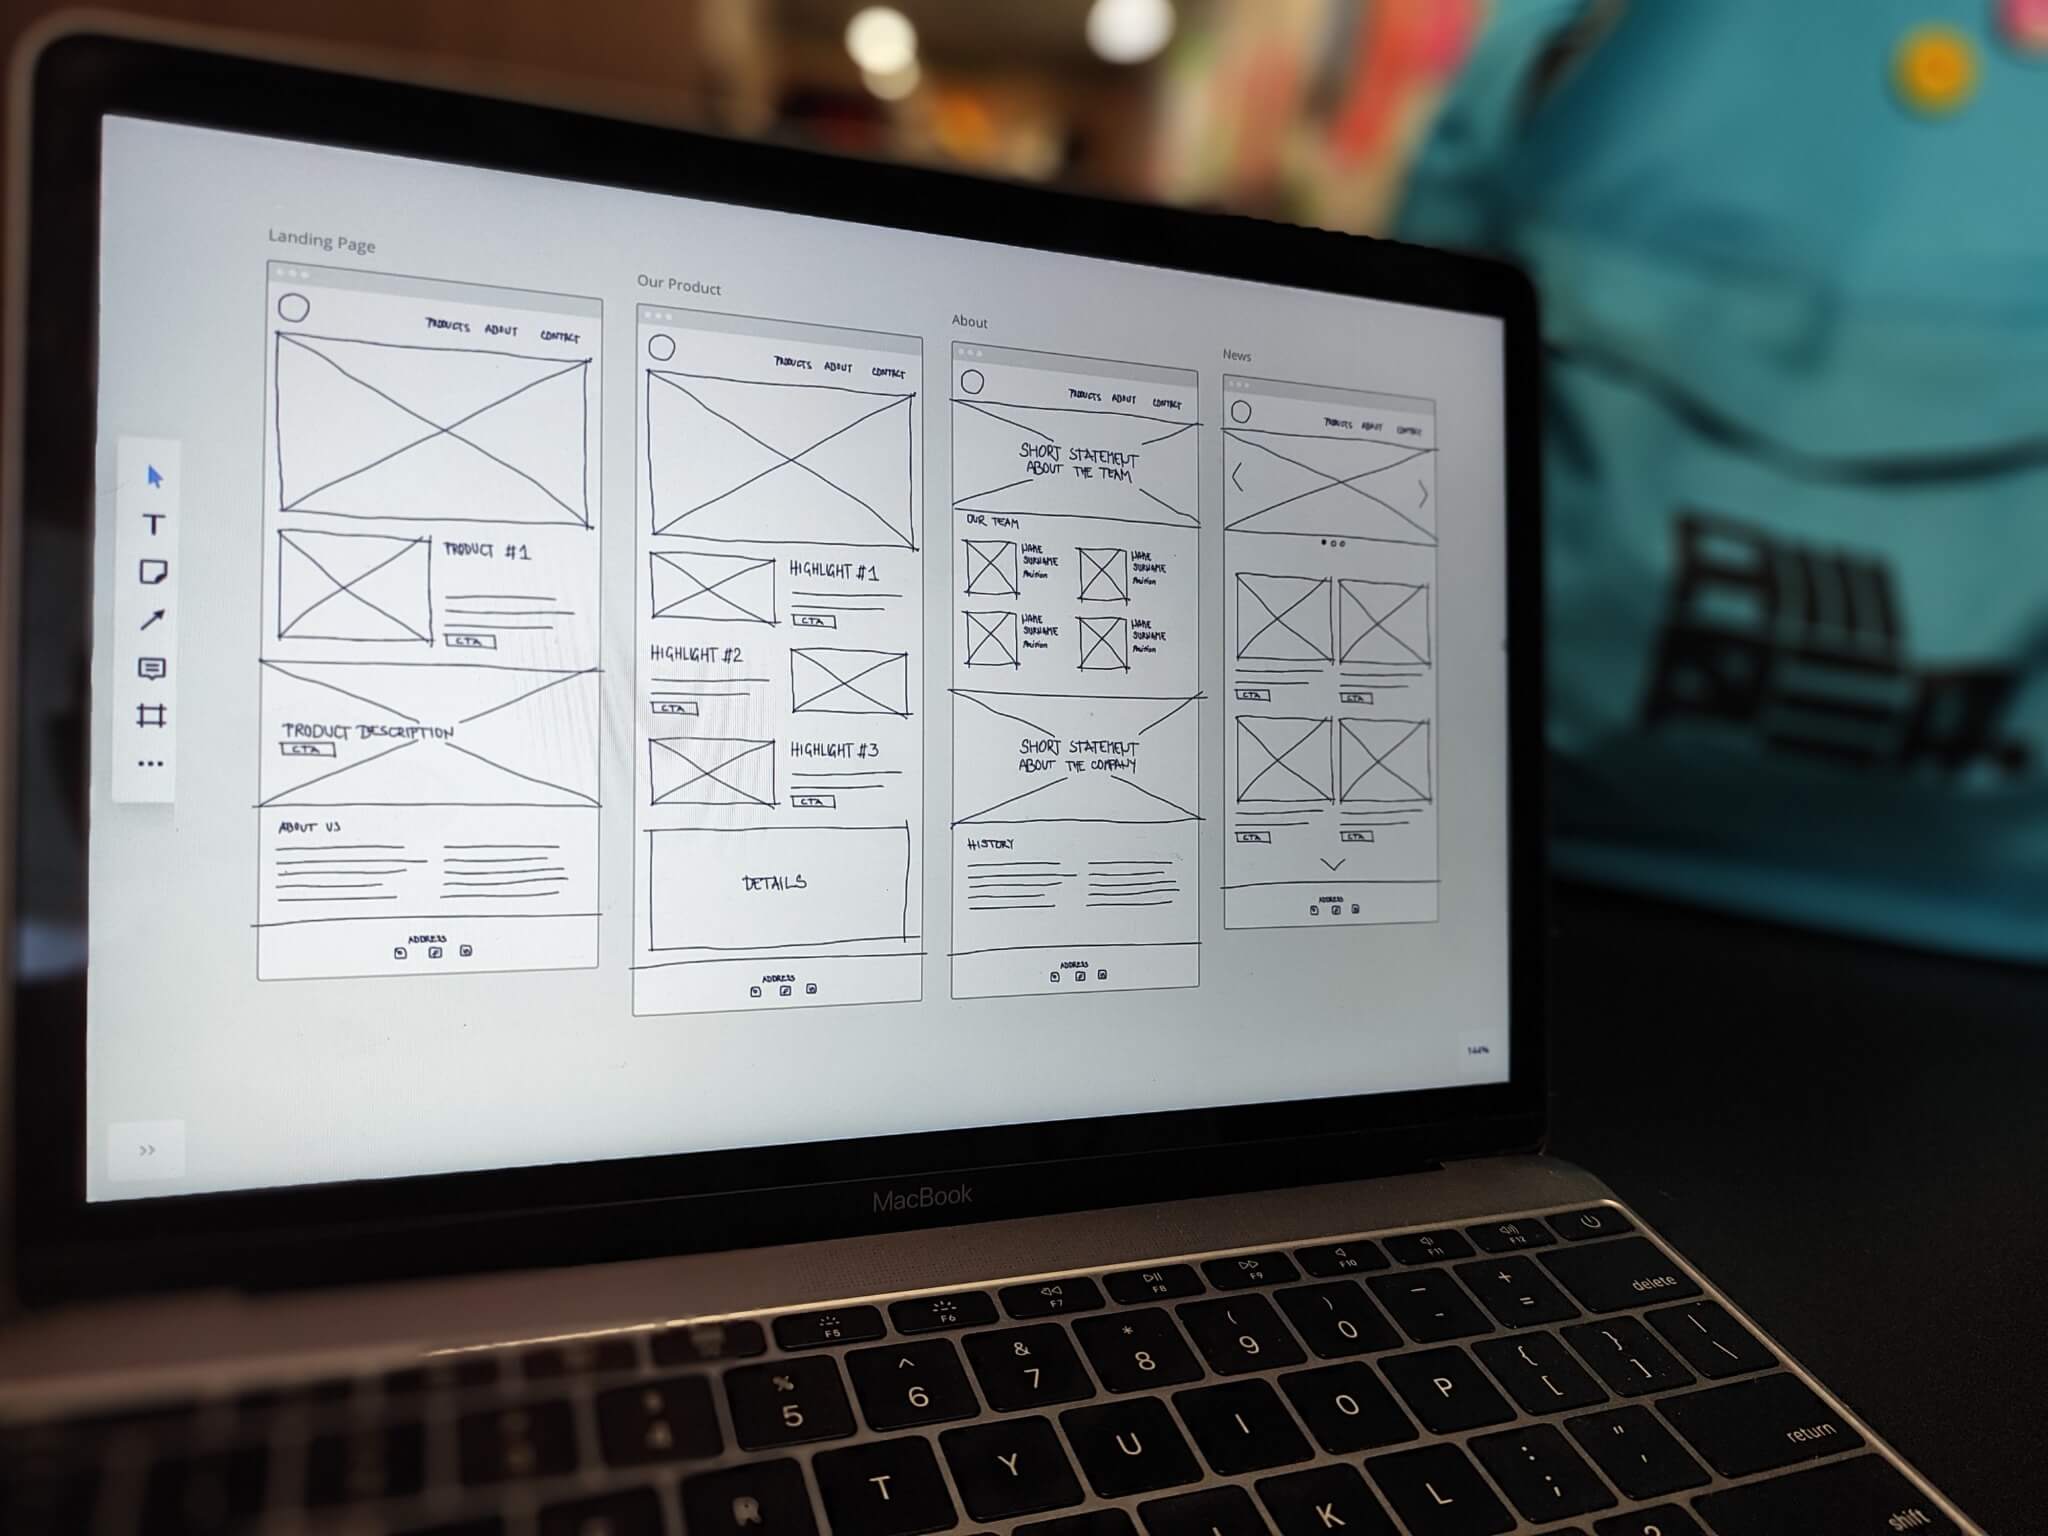 Laptop screen with UX sketches in black and white